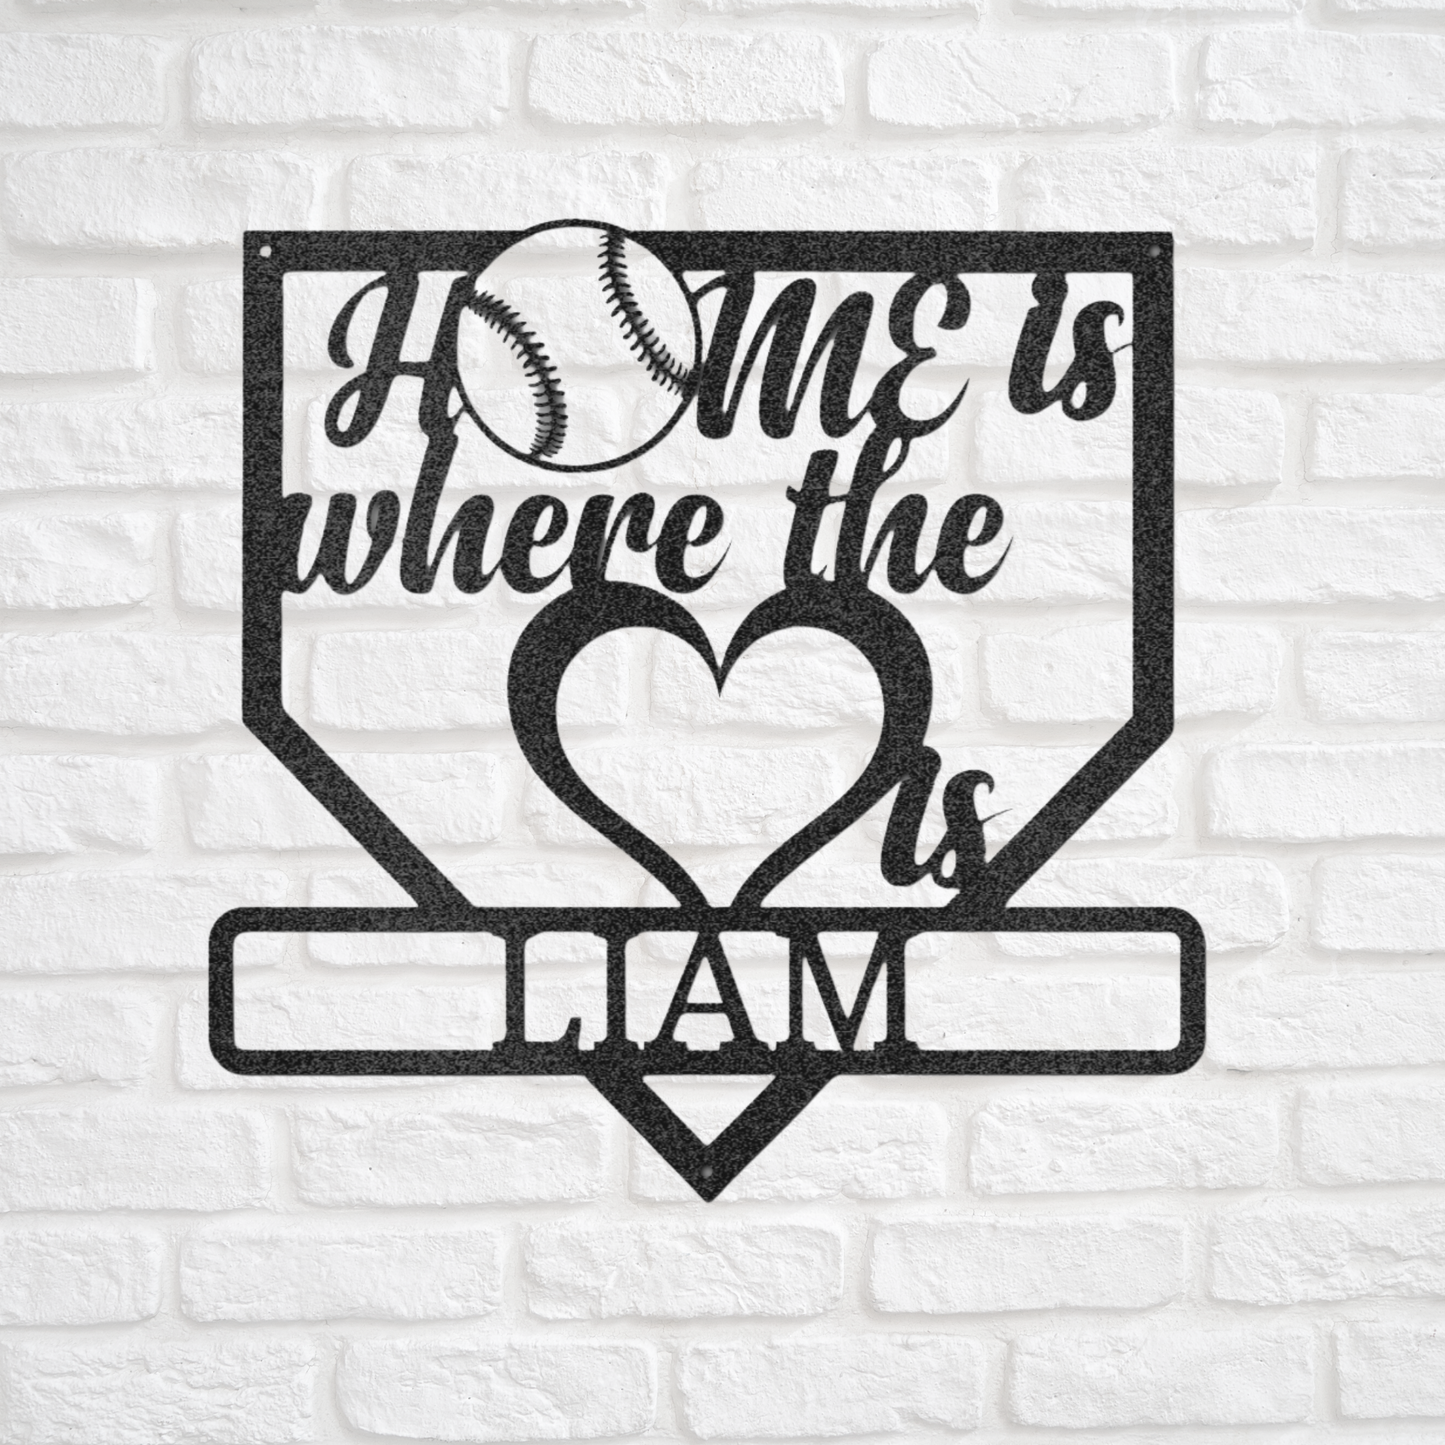 Home is Where the Heart is - Baseball Sign - Laser Cut Metal Sign, Playroom Sign, Gift for Baseball Player